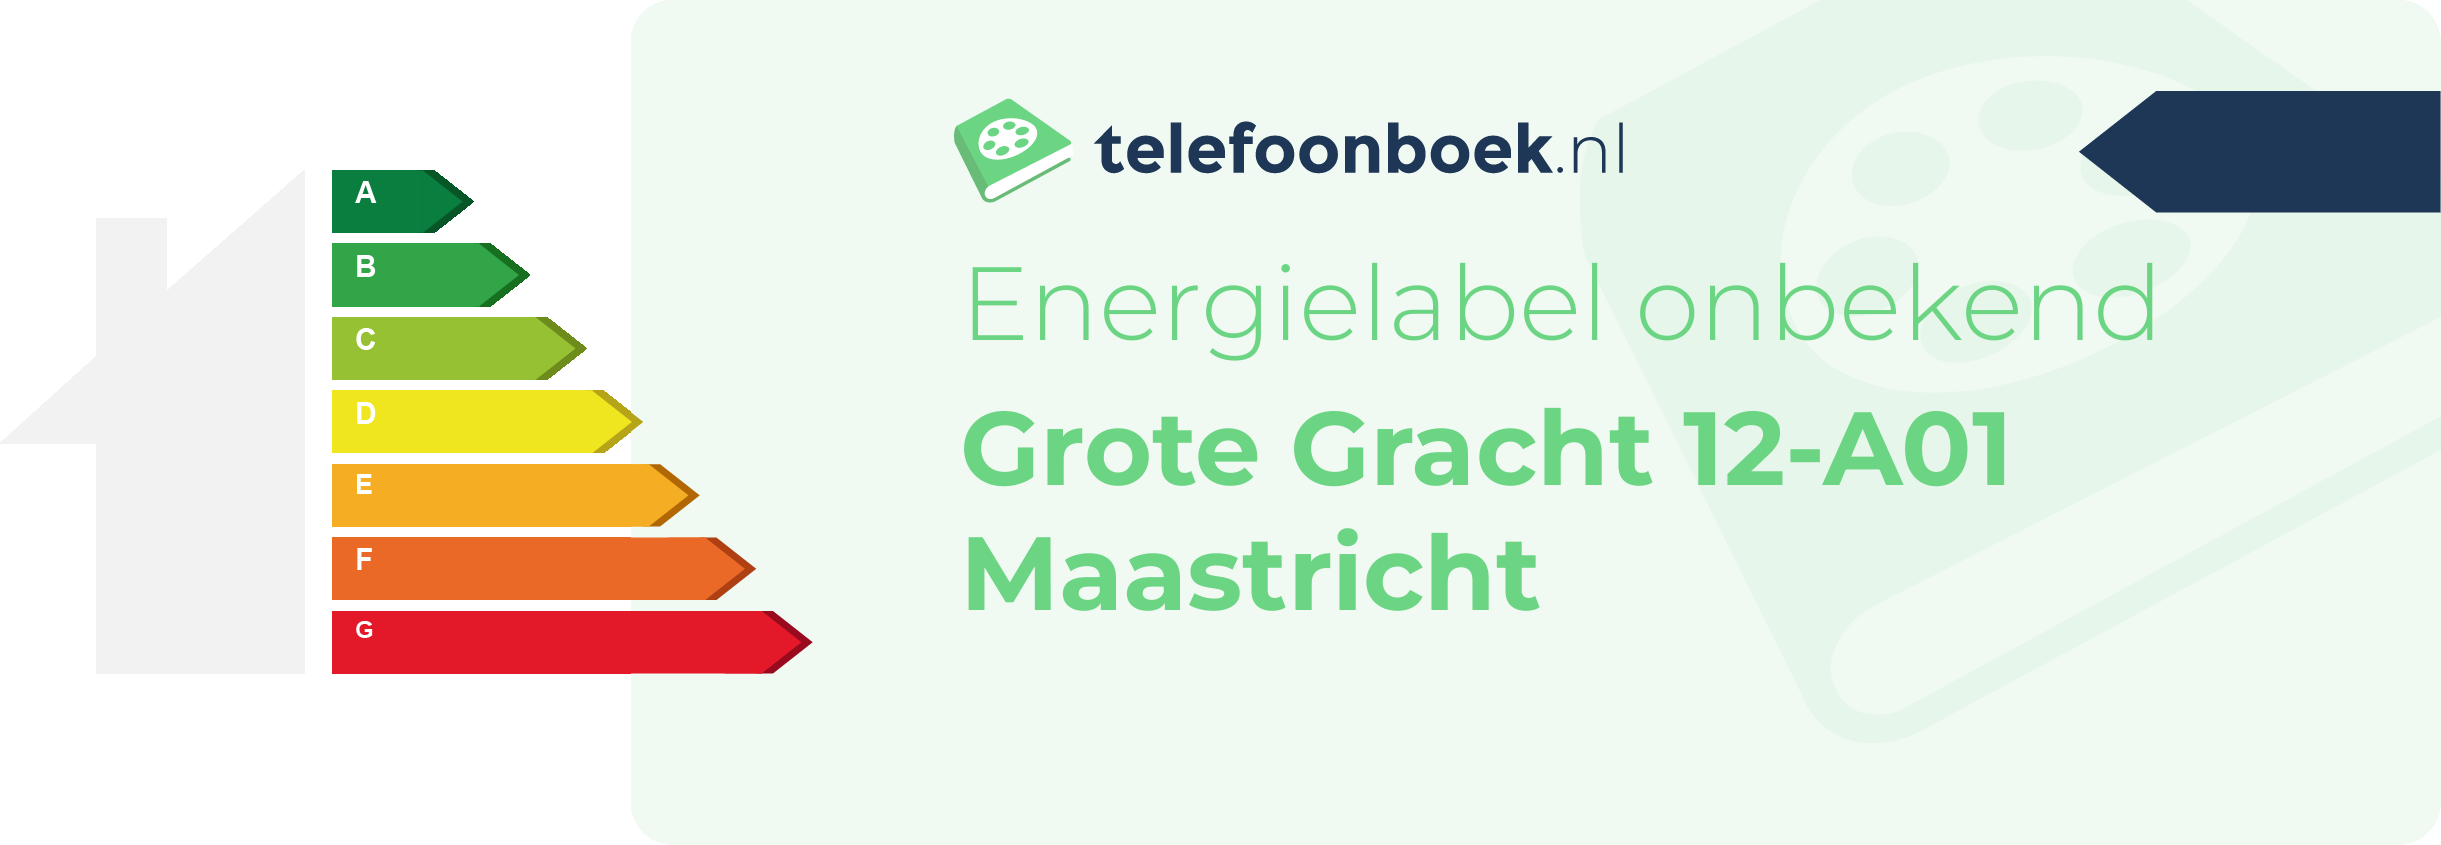 Energielabel Grote Gracht 12-A01 Maastricht